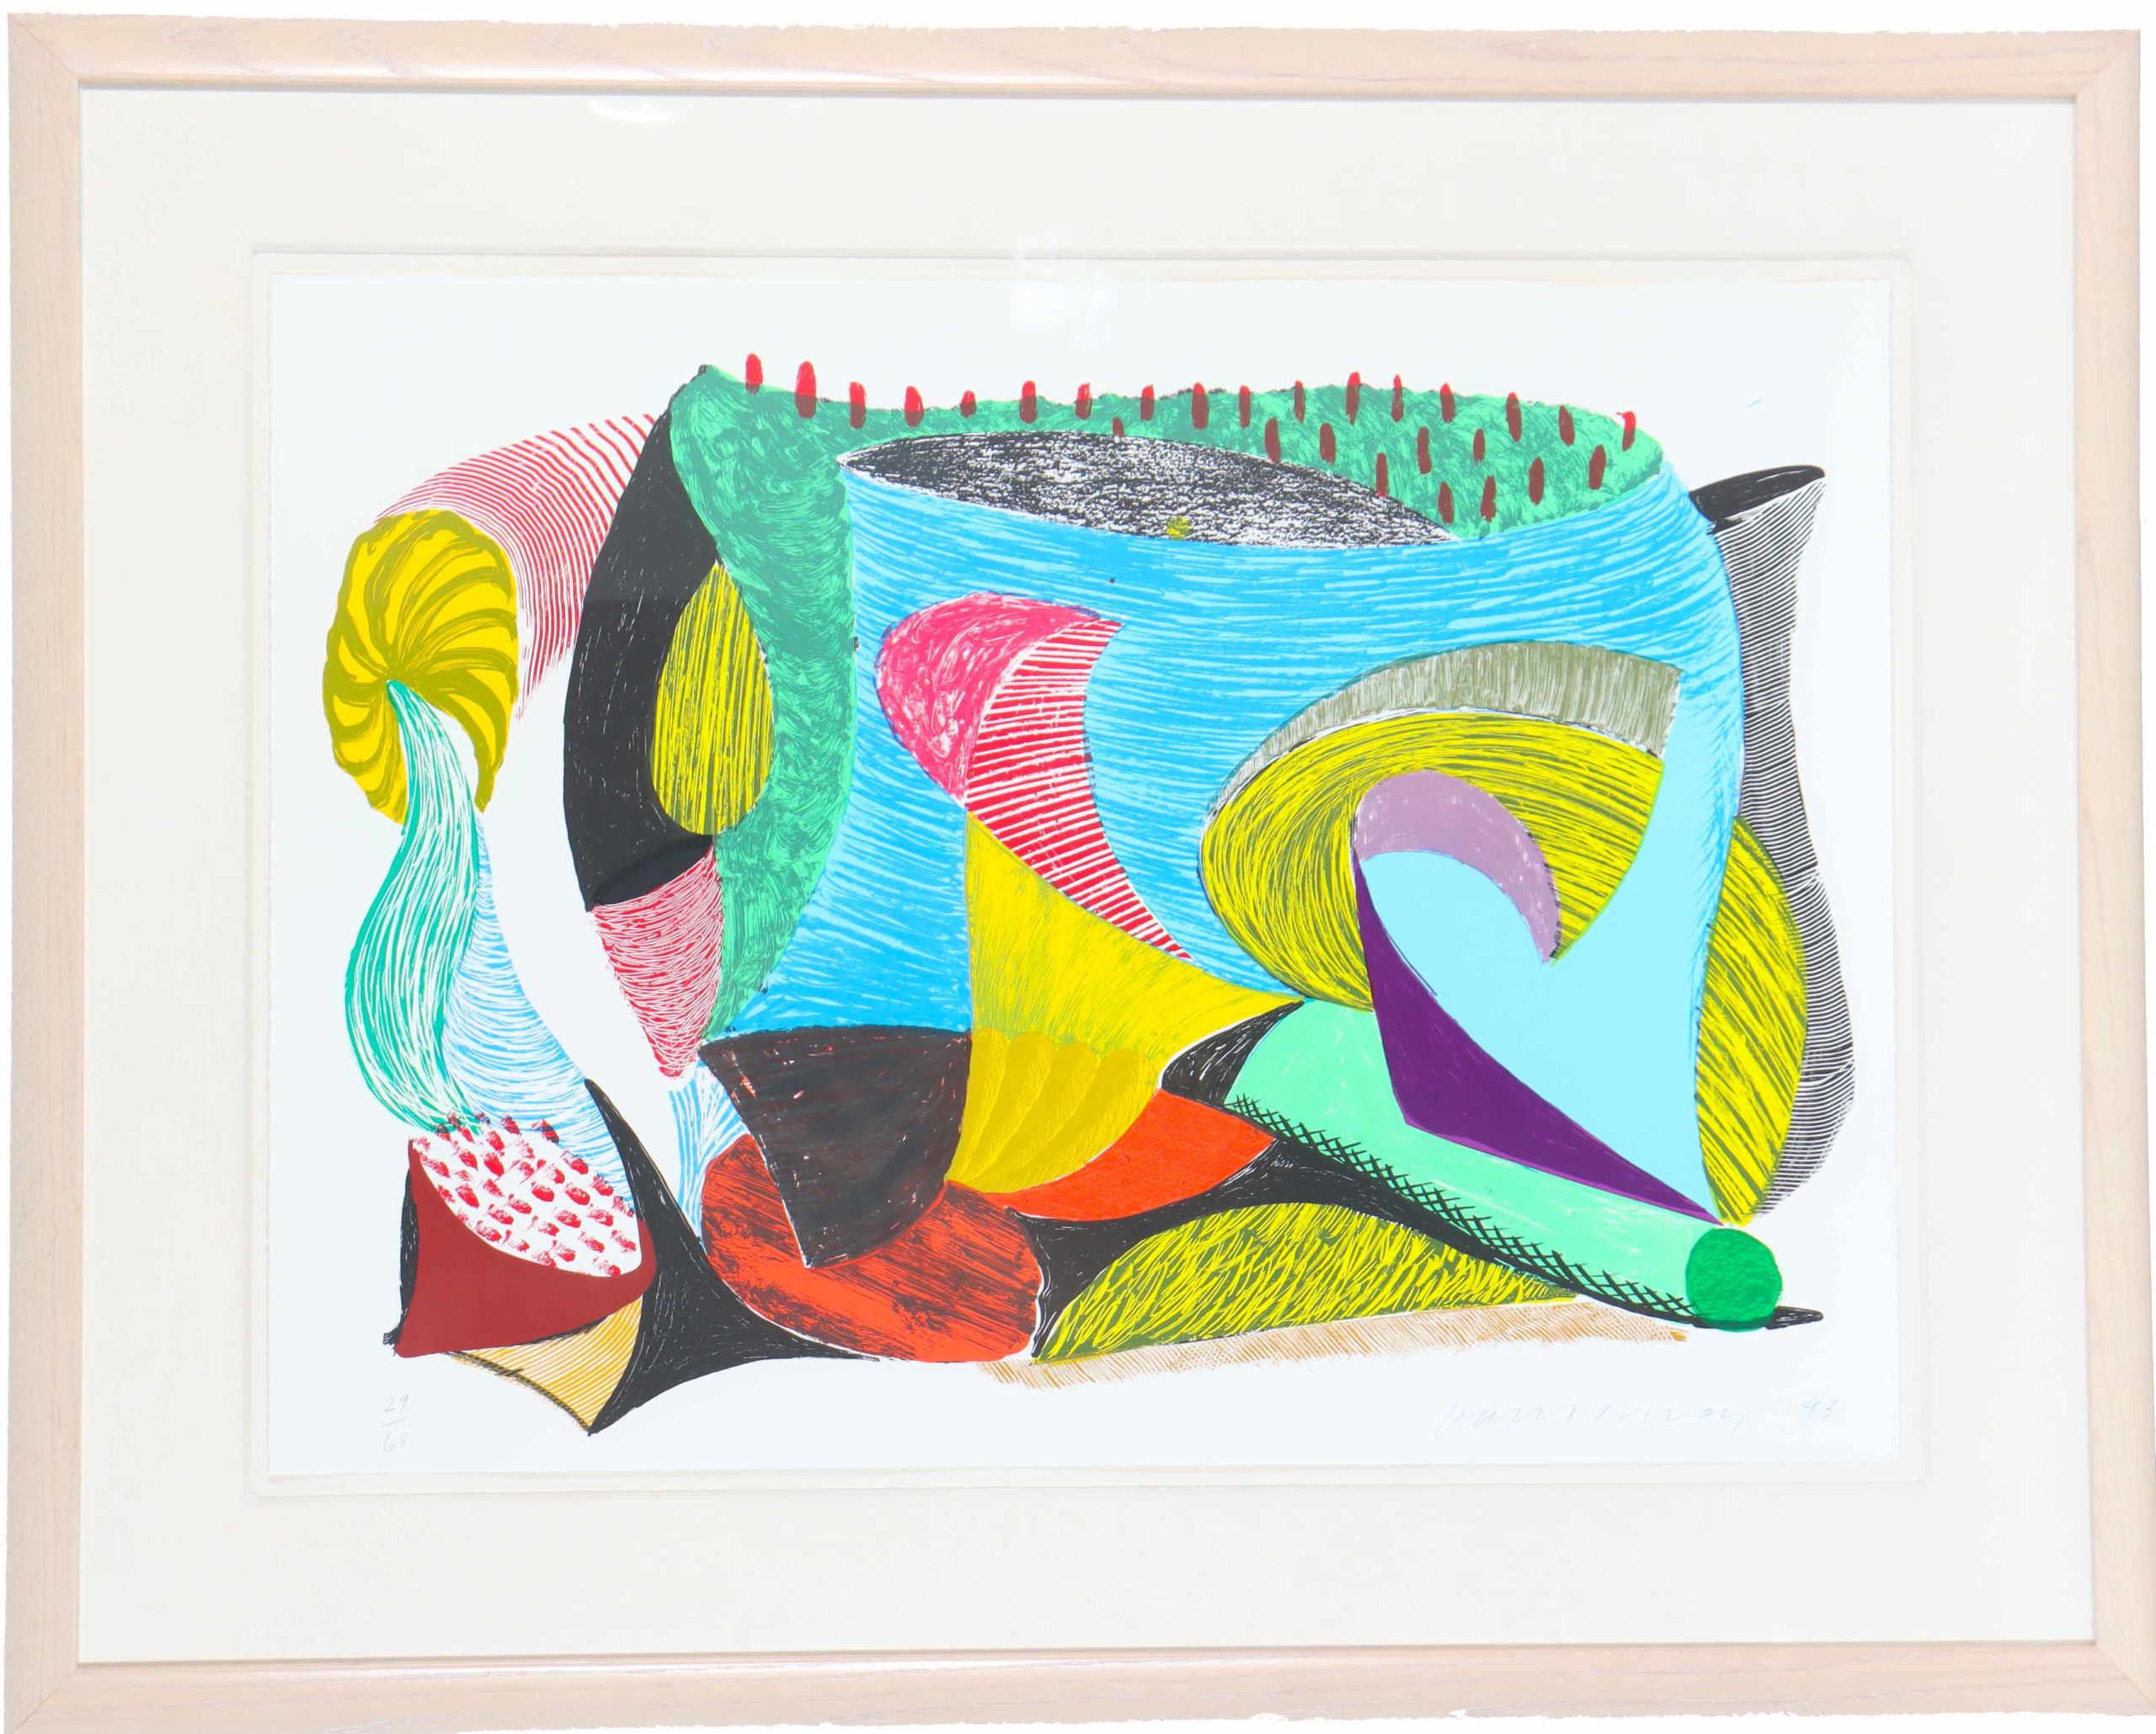 You are currently viewing David Hockney (b 1937) Lithograph Screenprint “Above and Beyond” 29 of 68